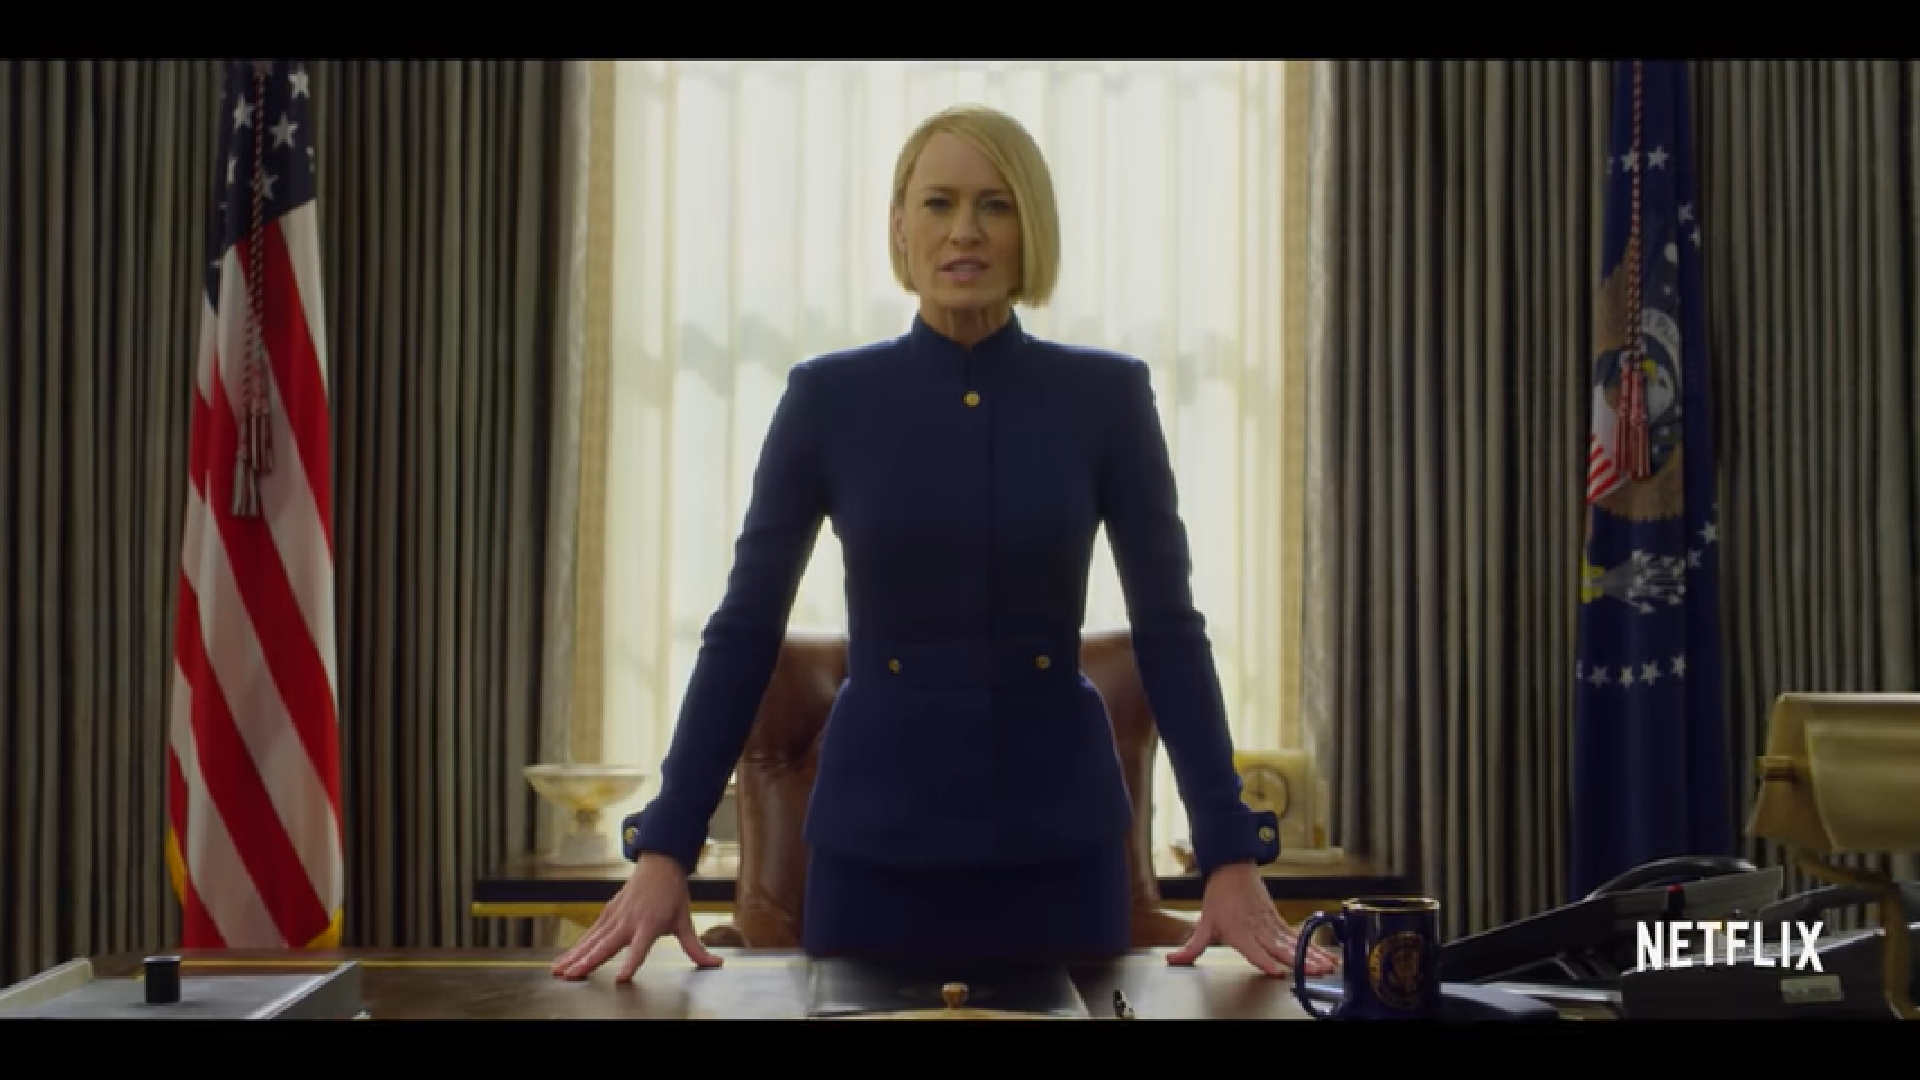 Flix S House Of Cards Season Will Focus On Claire Underwood